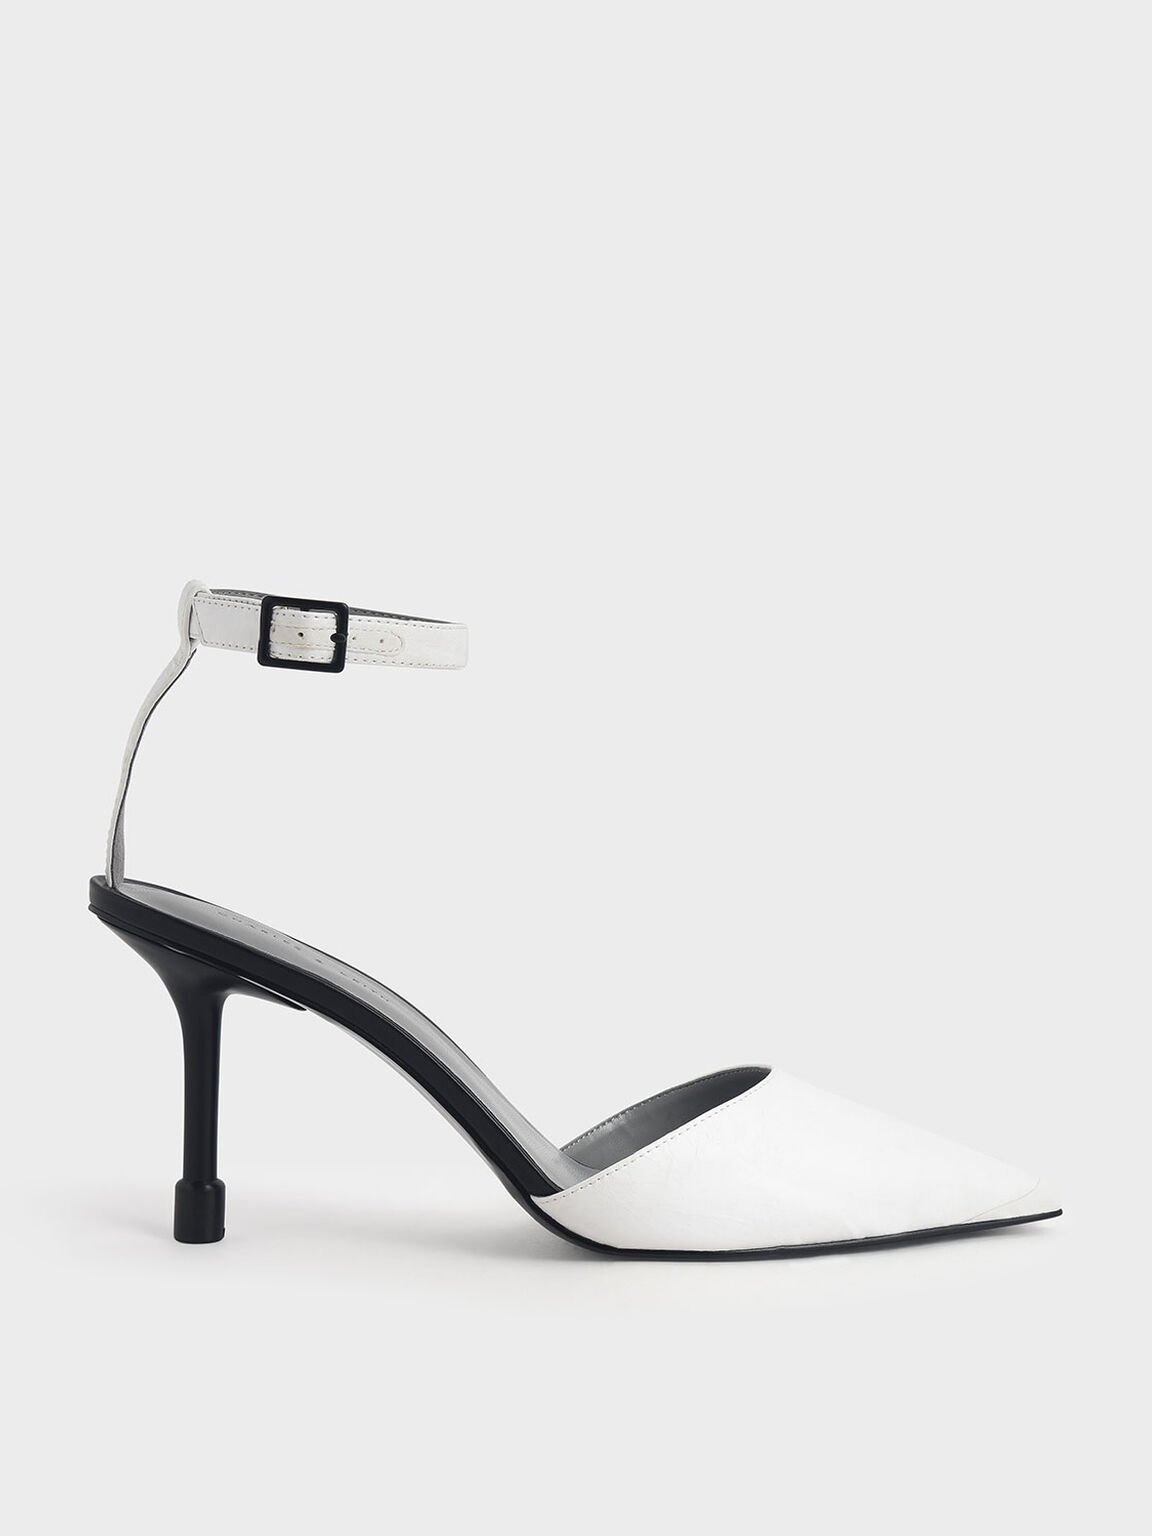 Ankle Strap Pointed Toe Pumps, White, hi-res